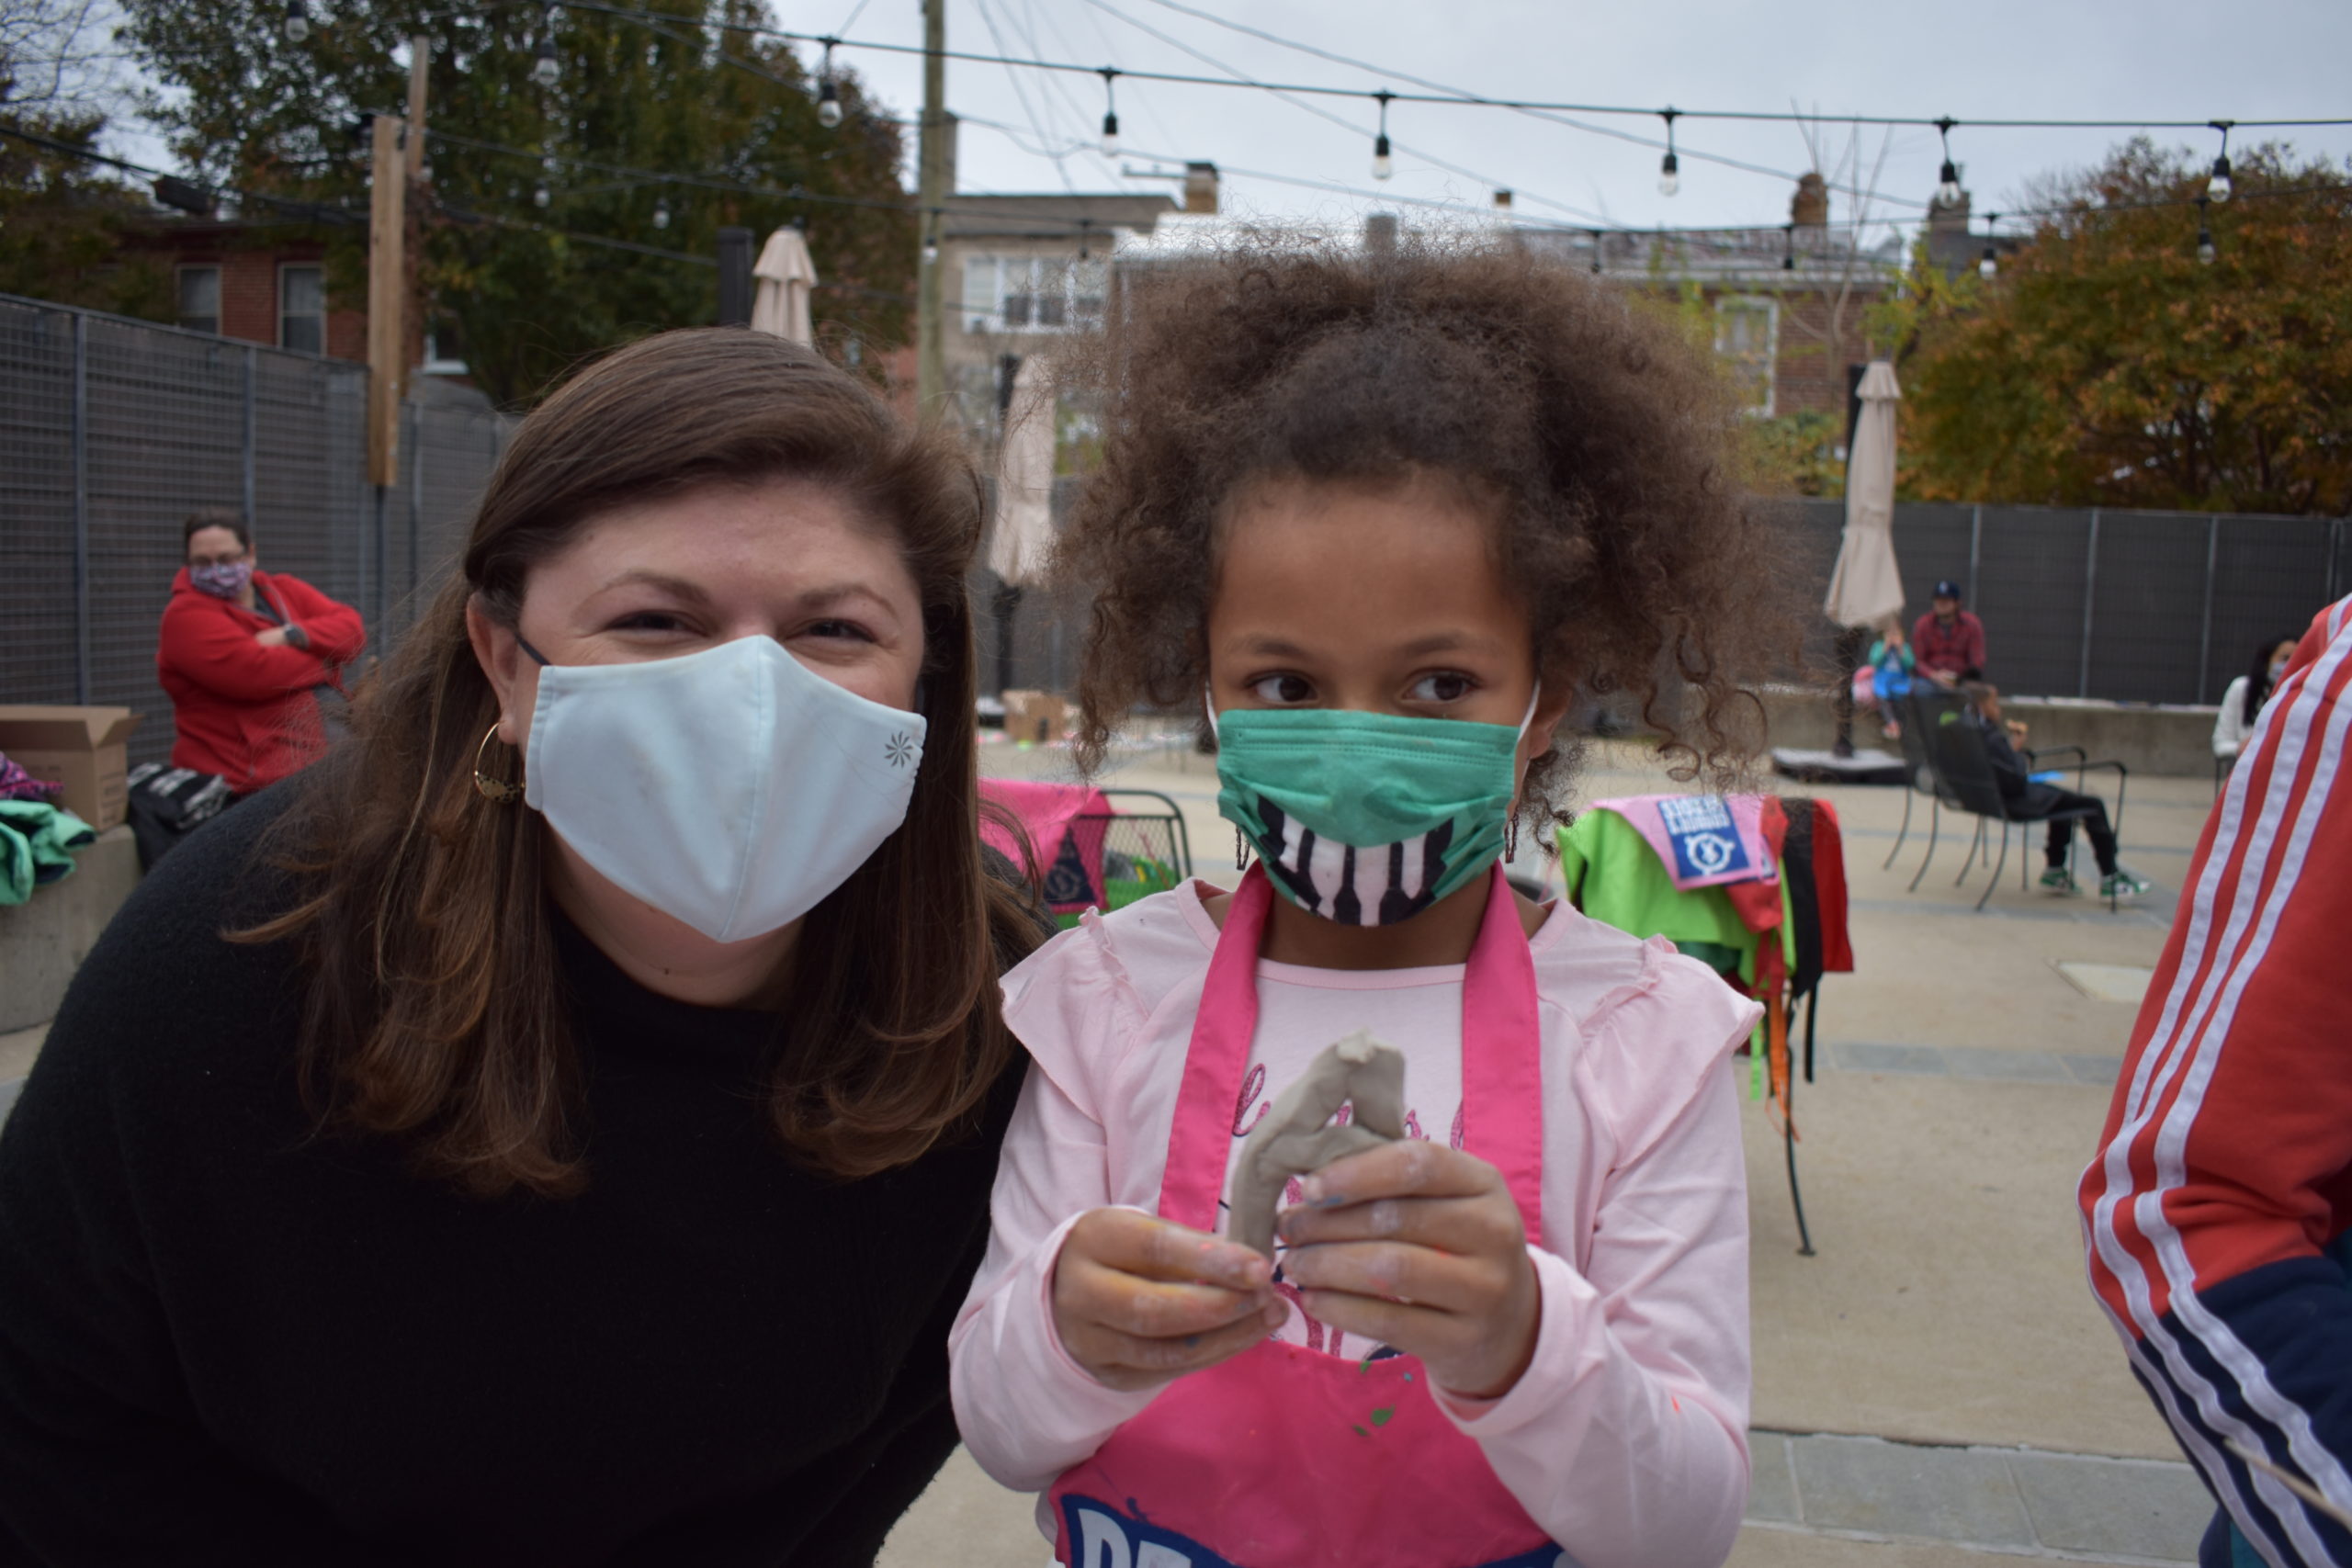 A girl standing next to a woman both are wearing cloth face masks